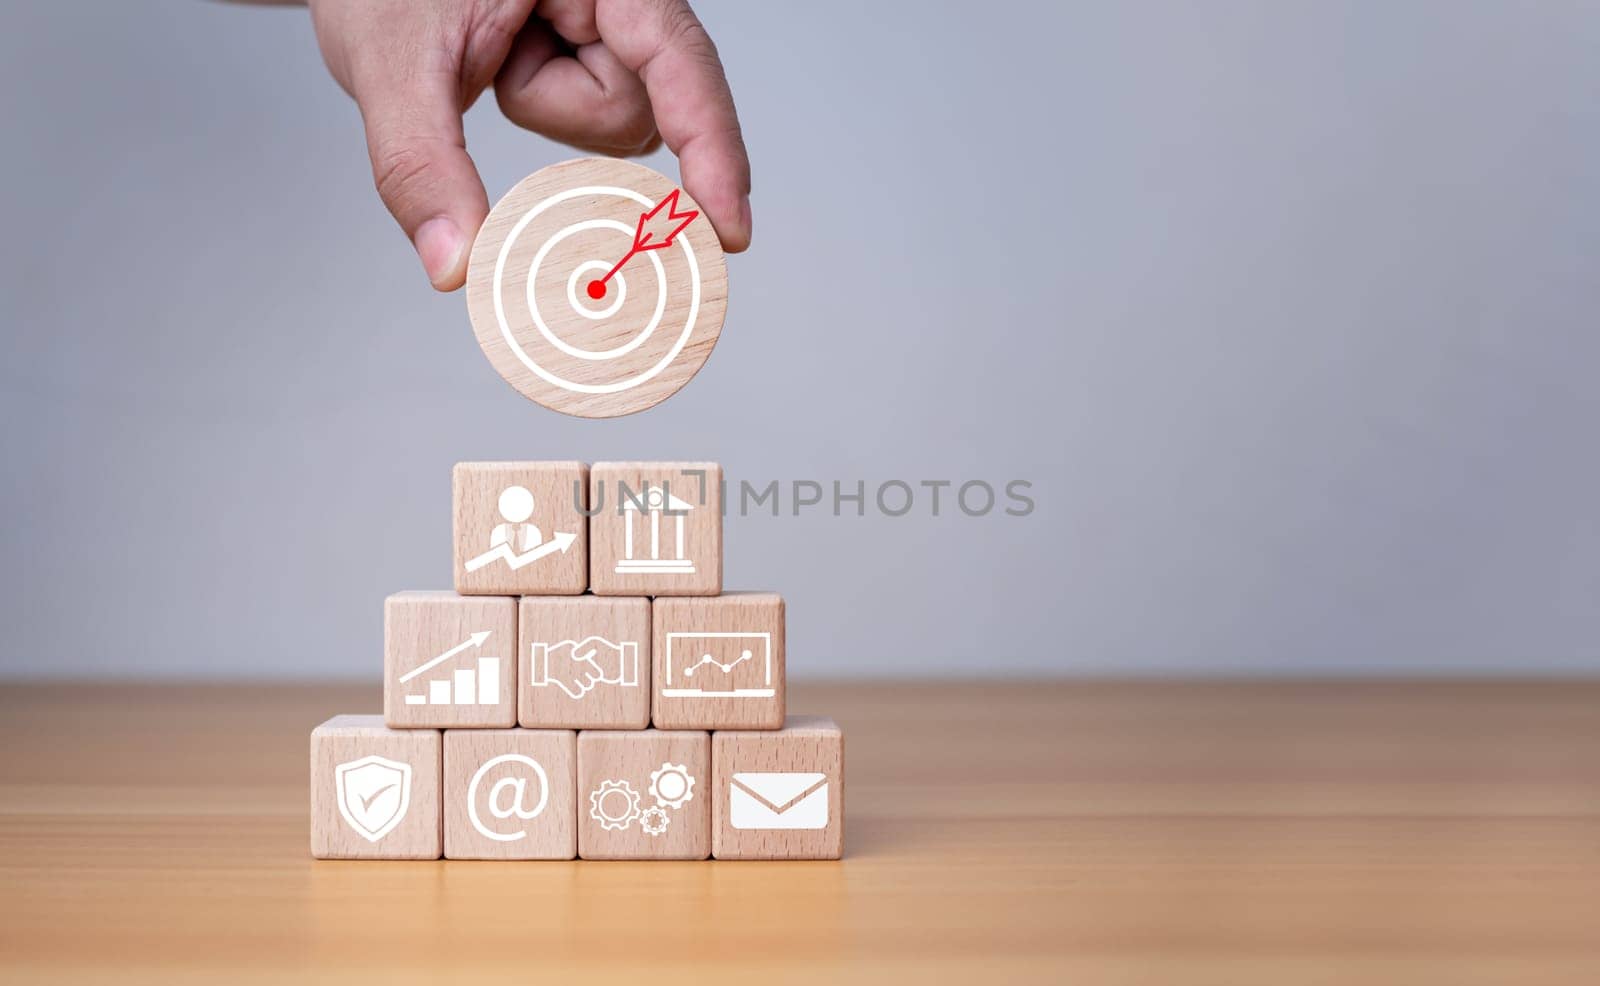 Businessman's hands hold a circular wooden board with printed target icons, business goals and objectives concept, business competition.